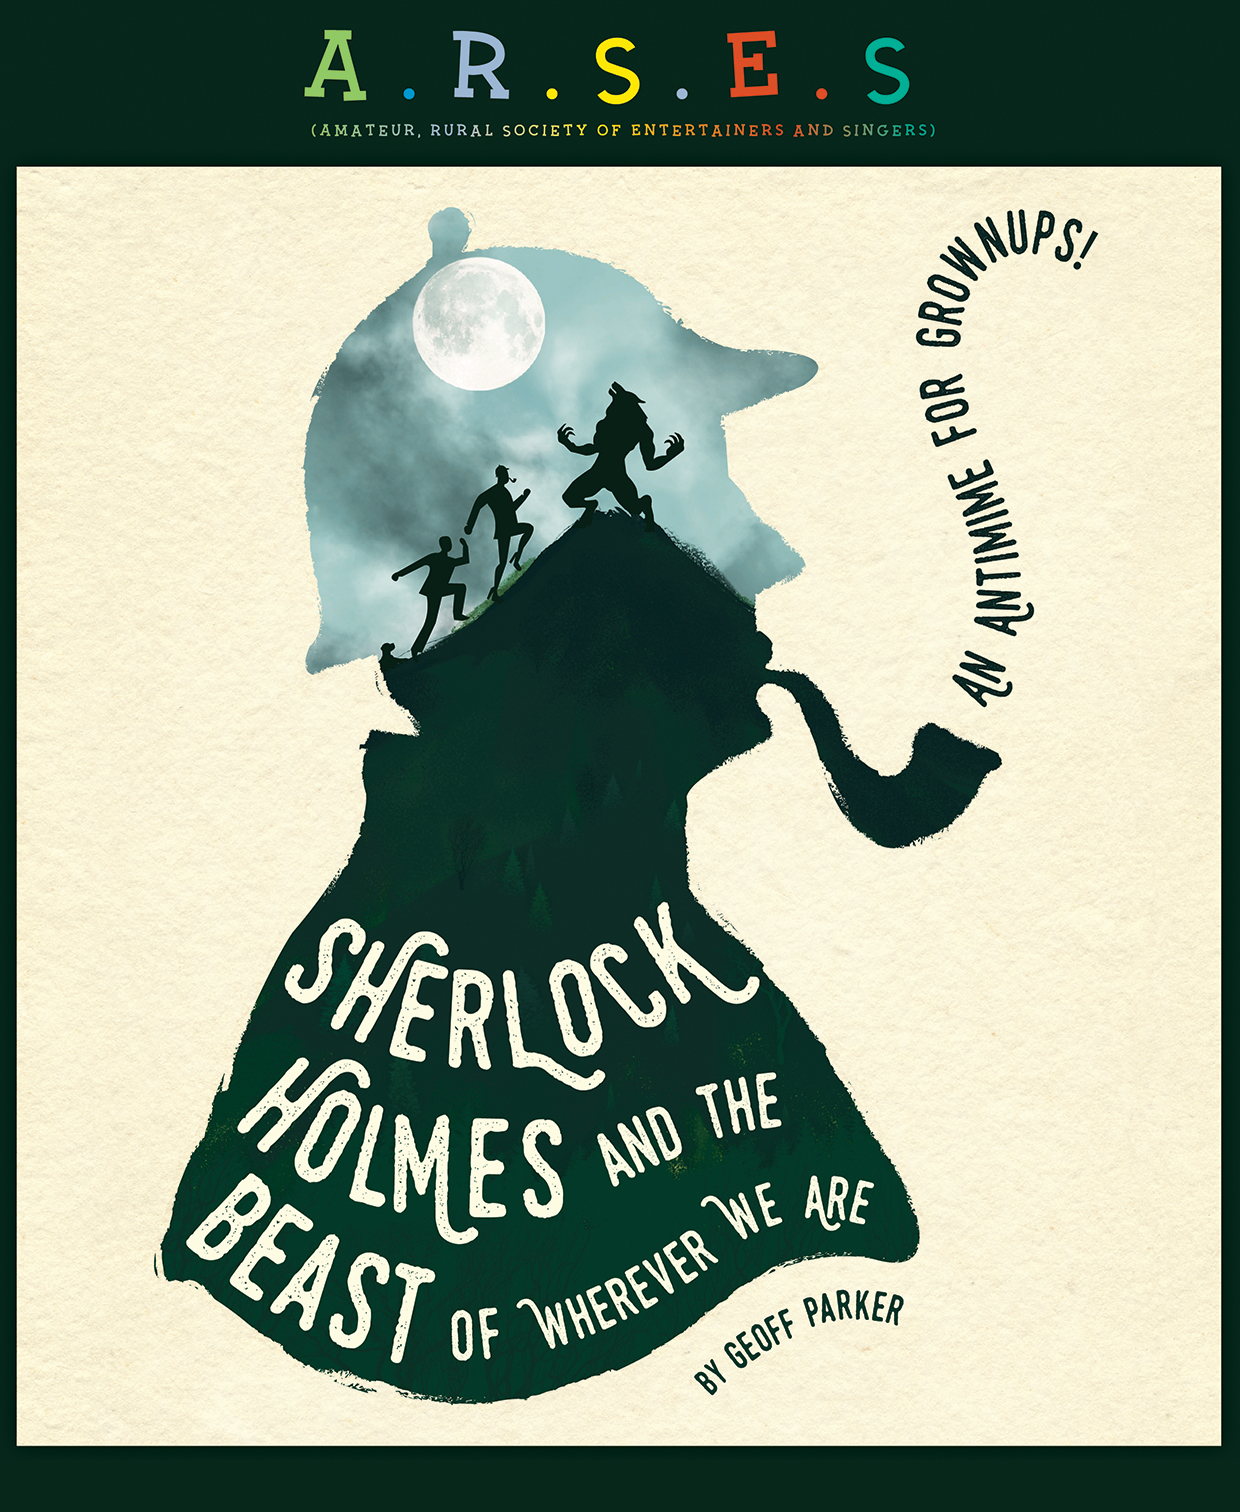 Sherlock Holmes and the beast of Wherever We are Play poster by Falling Stars Theatre. An Antimime for grownups.